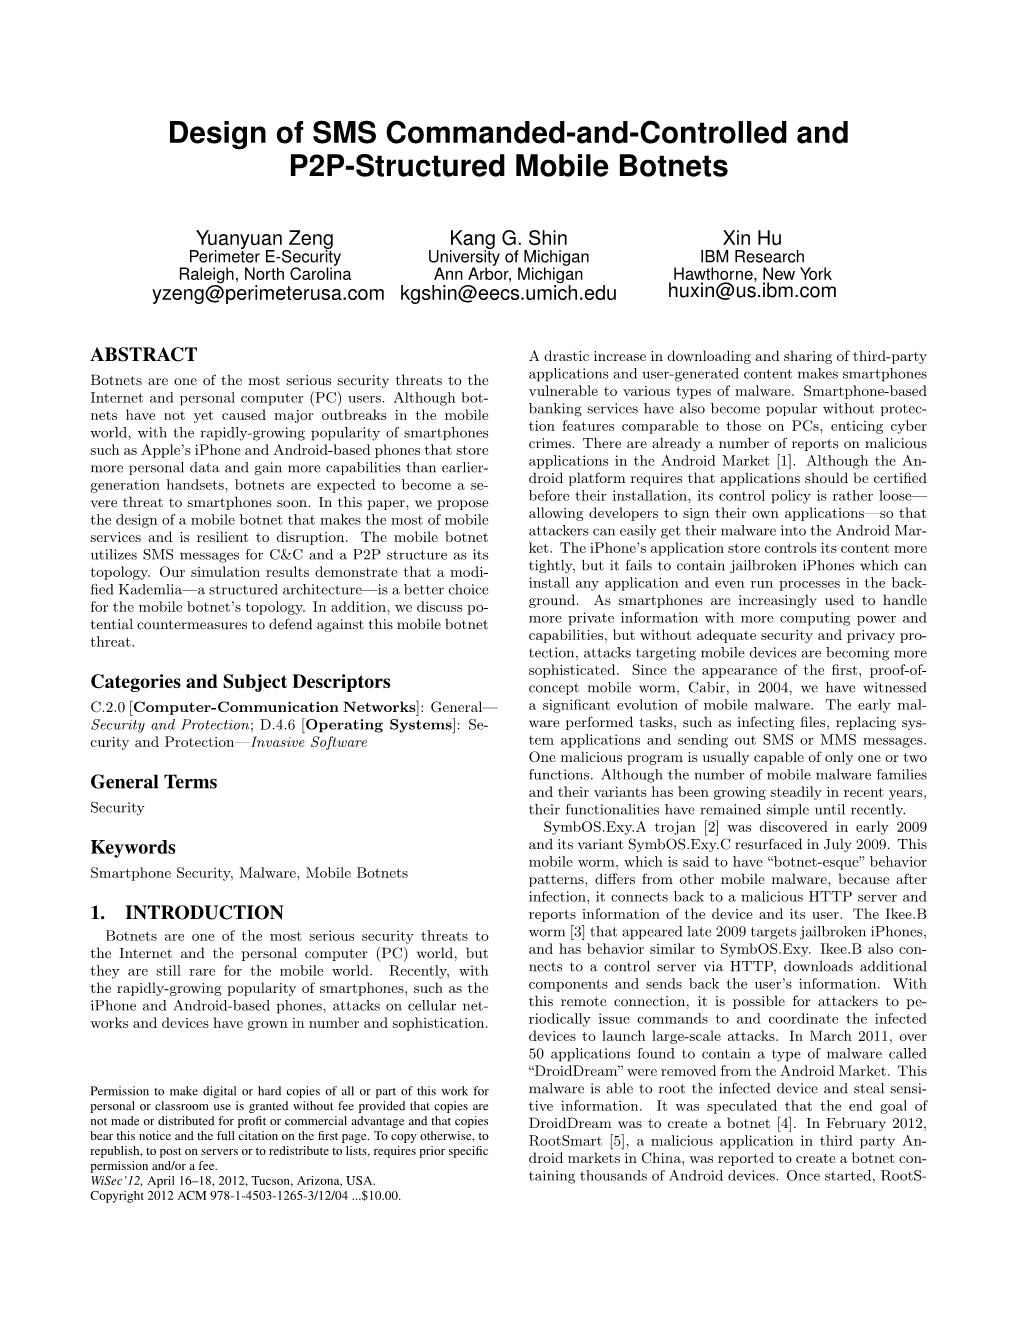 Design of SMS Commanded-And-Controlled and P2P-Structured Mobile Botnets